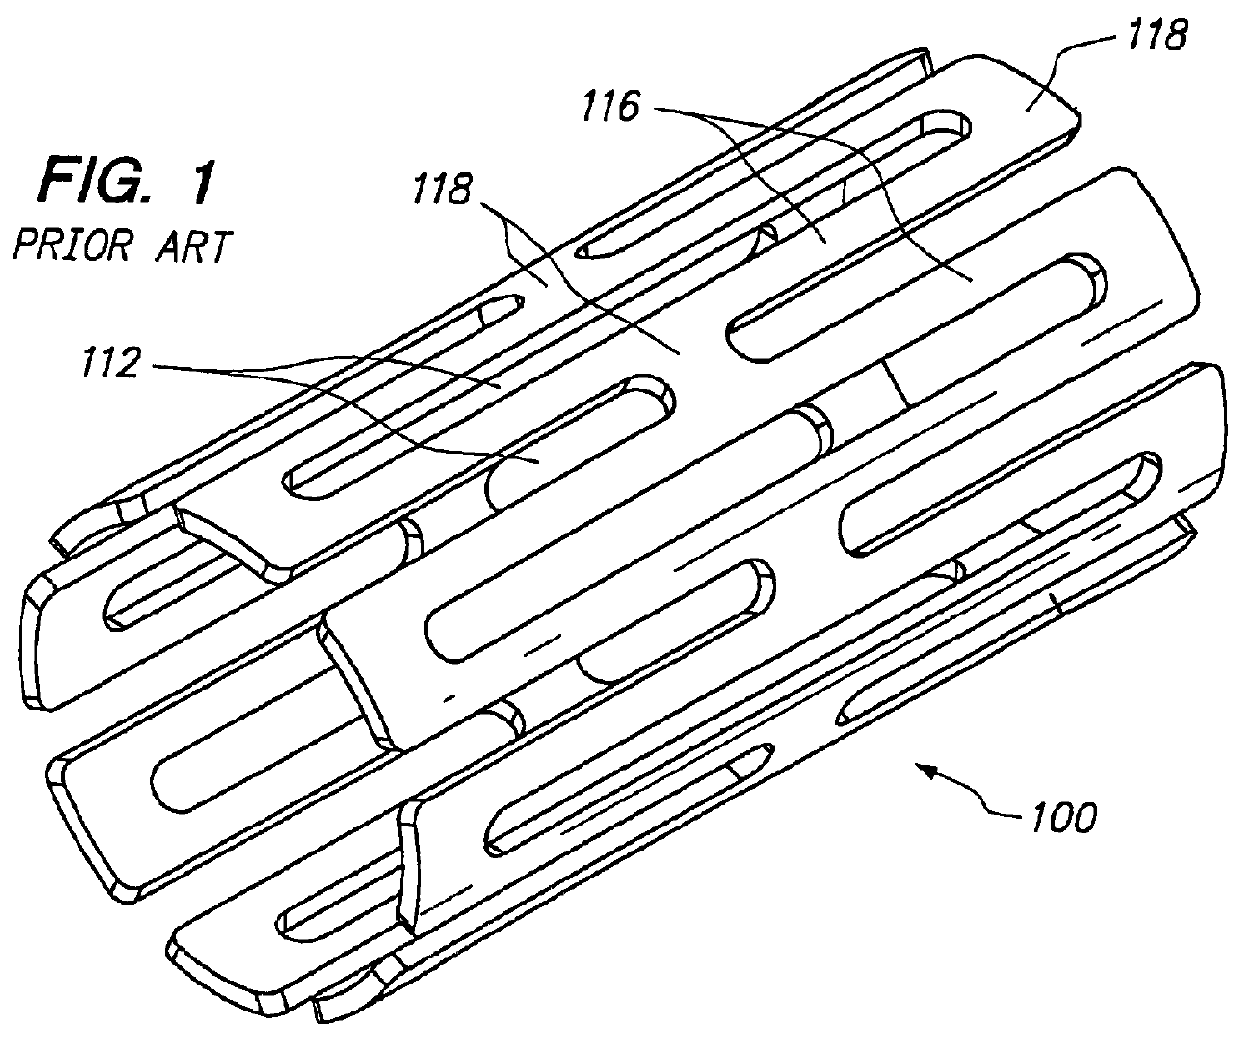 Expandable medical device with beneficial agent in openings